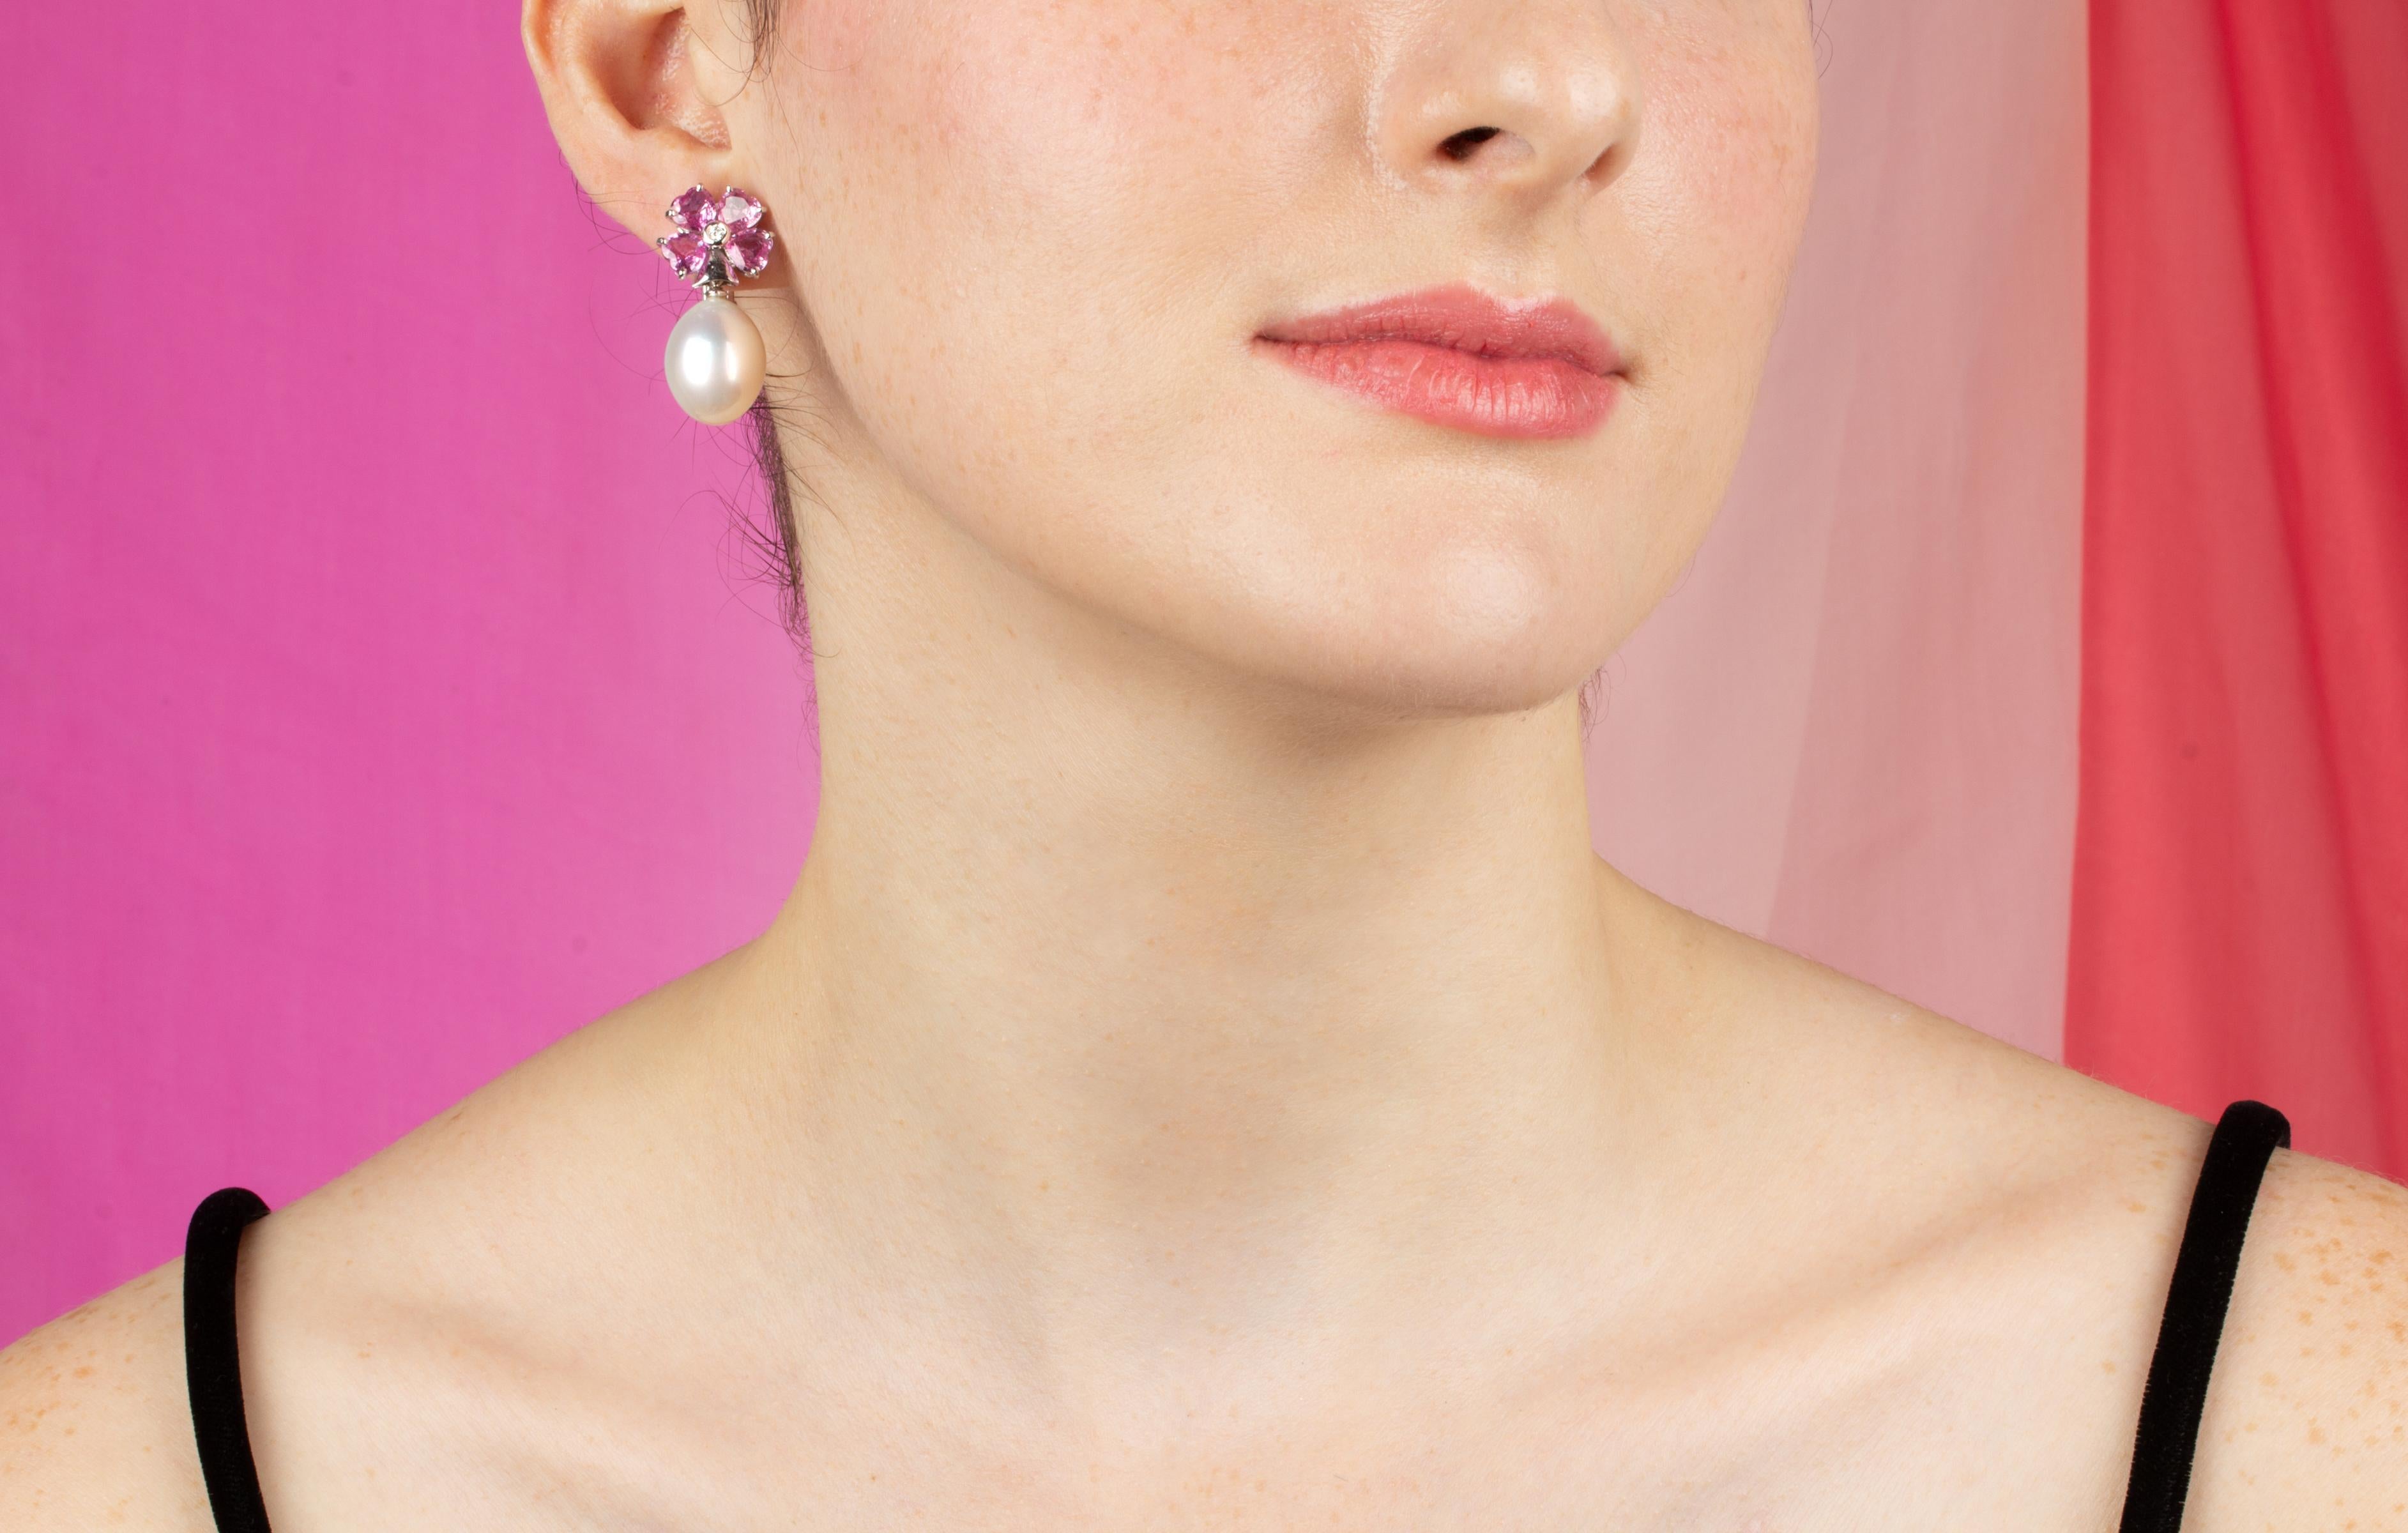 The South Sea pearl earrings feature a flower design on the ear with 6.82 carats of heart shaped pink sapphires. The tops suspend 2 South Sea pearls of 13 x16mm diameter. 0.12 carats of round diamonds complete the design.
All of our pearls are